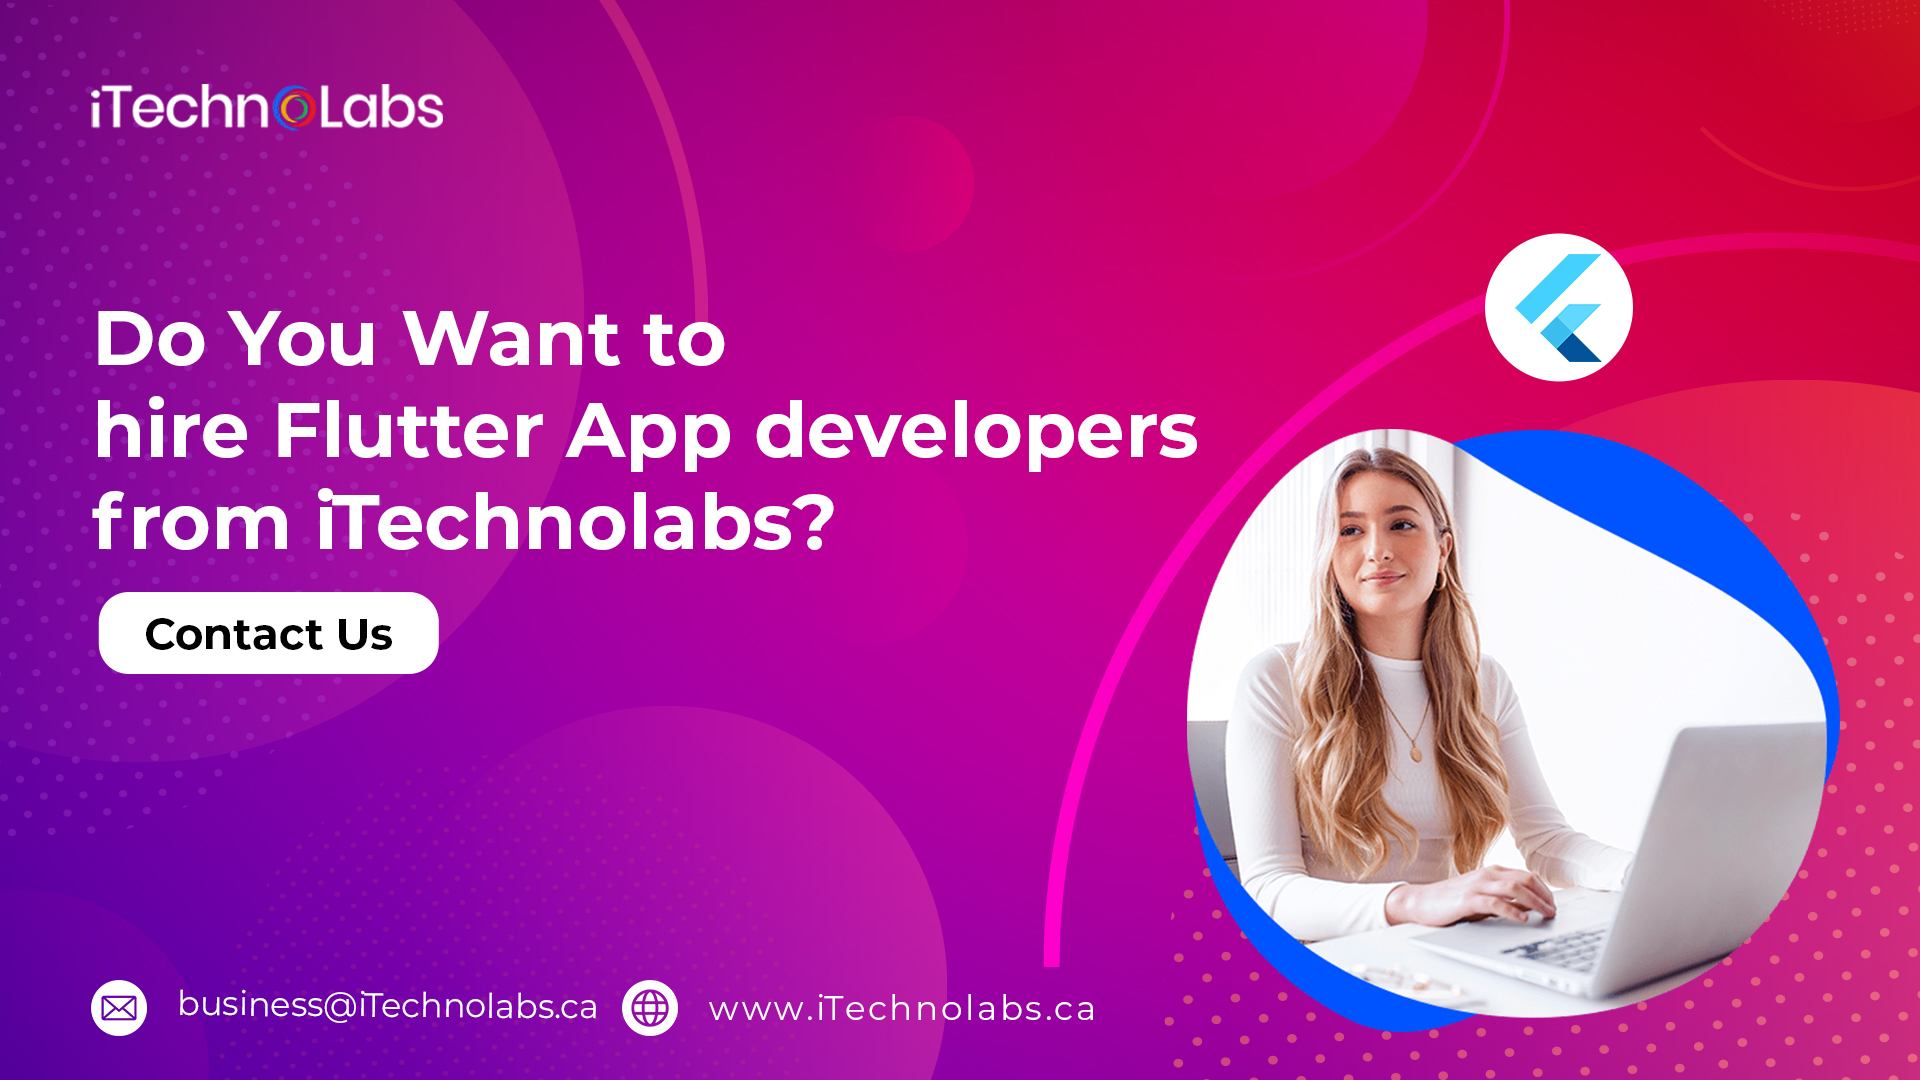 do you want to hire flutter app developers from itechnolabs